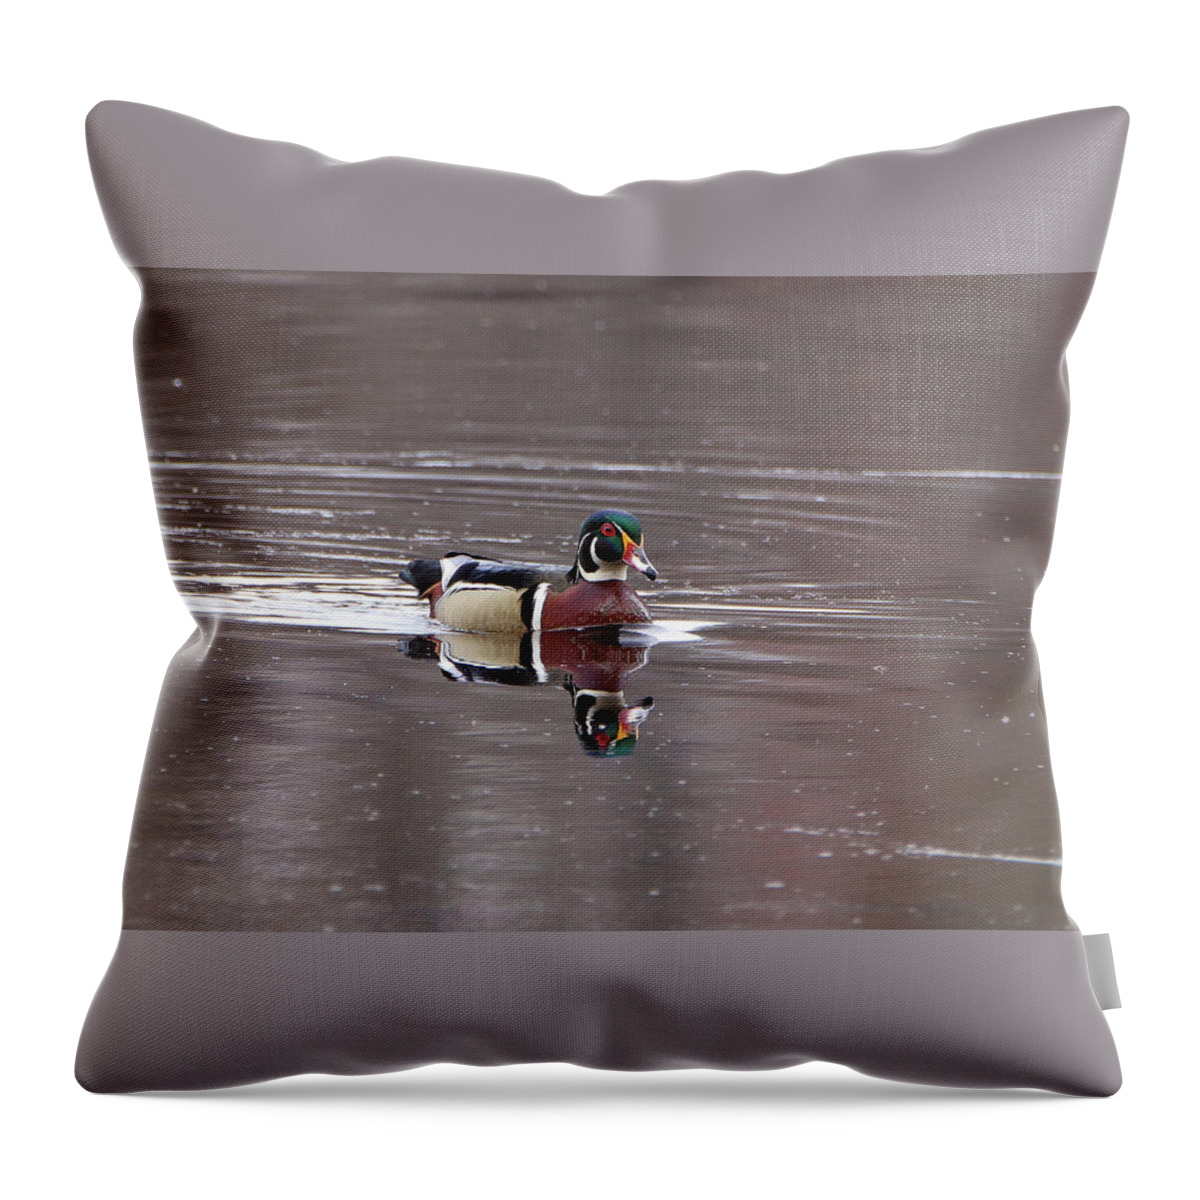 Woody Throw Pillow featuring the photograph Woody Playing by David Kipp